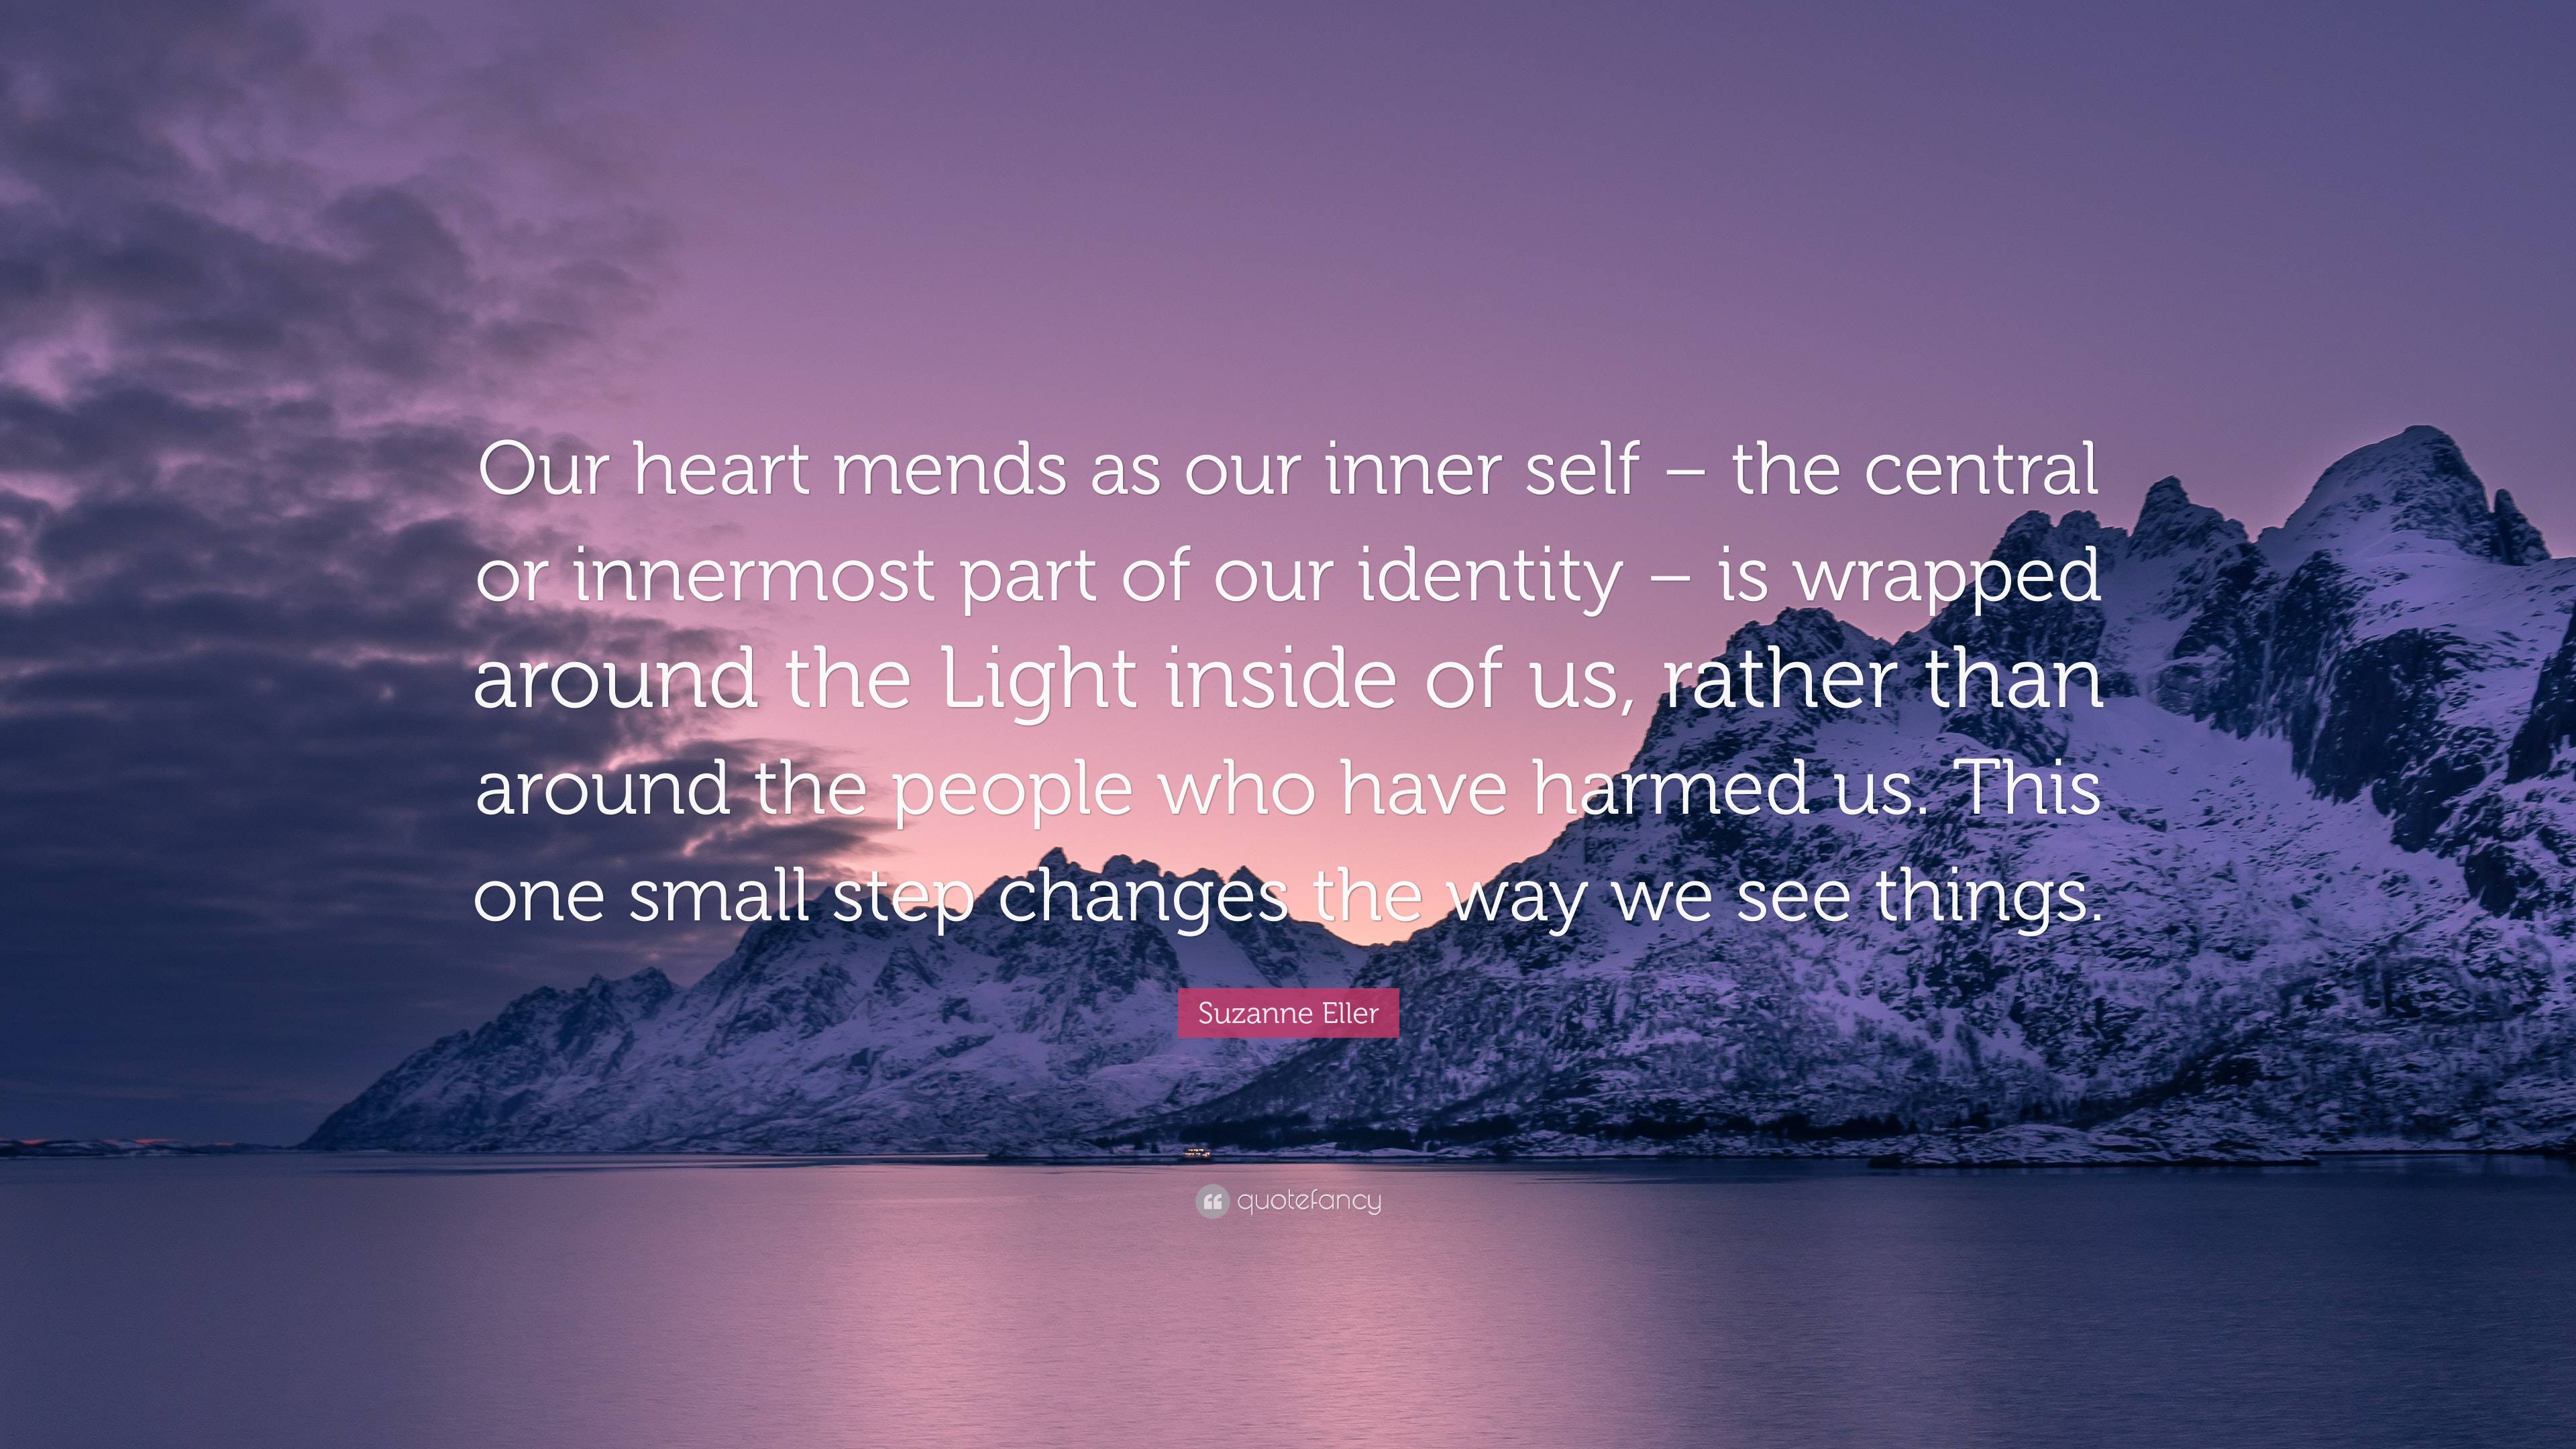 Suzanne Eller Quote: “Our heart mends as our inner self – the